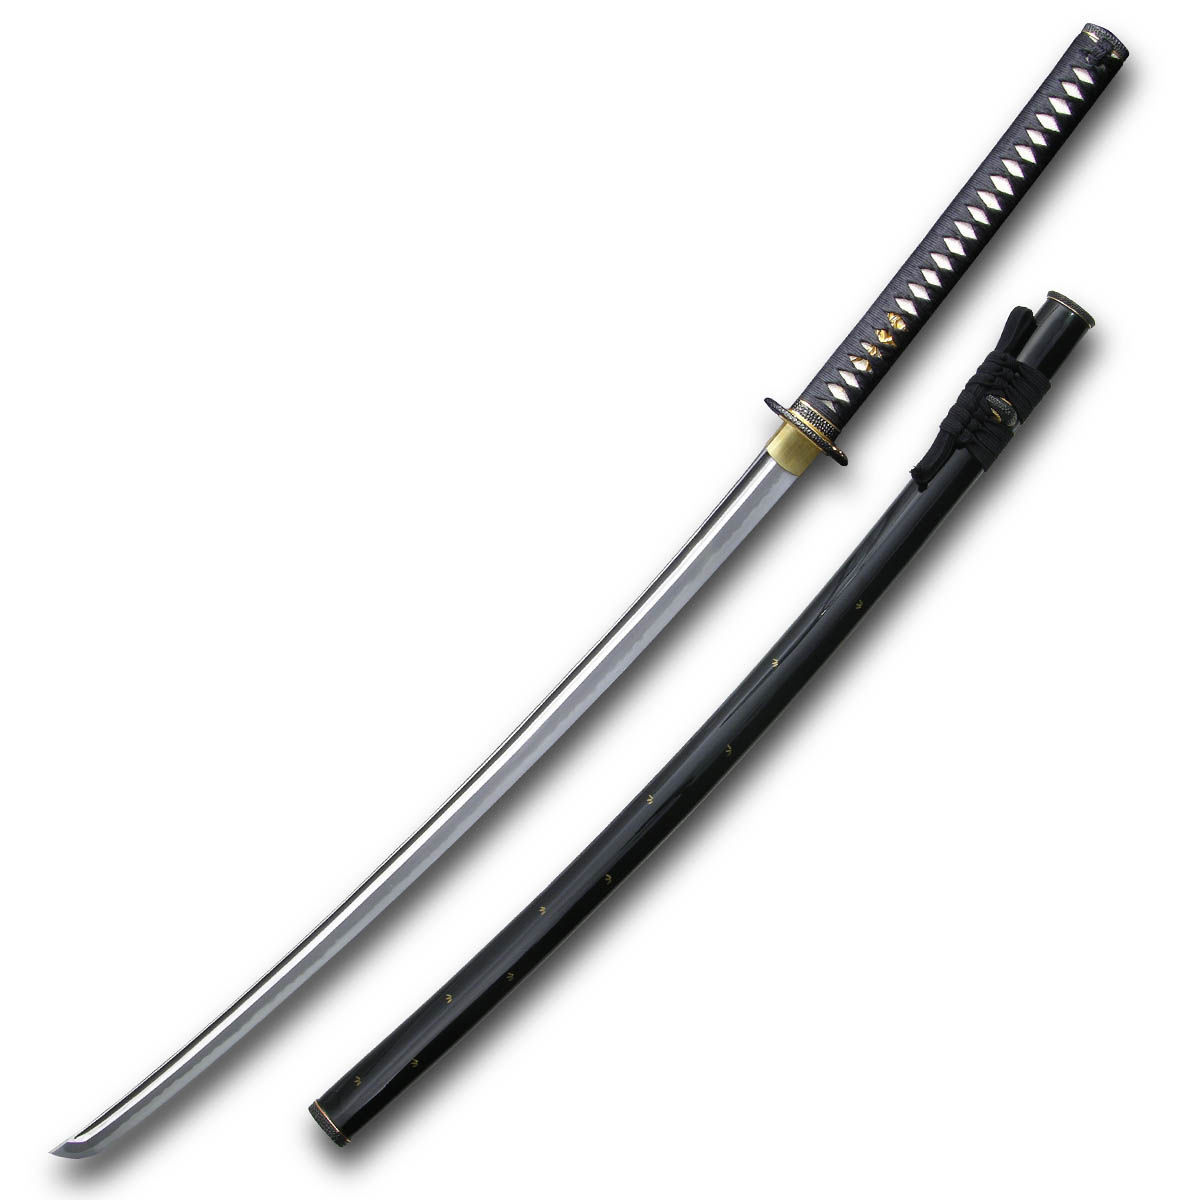 Hanwei's Tiger Katana has a folded steel blade with groove on both sides, rayskin handle with cotton wrap and lacquered saya